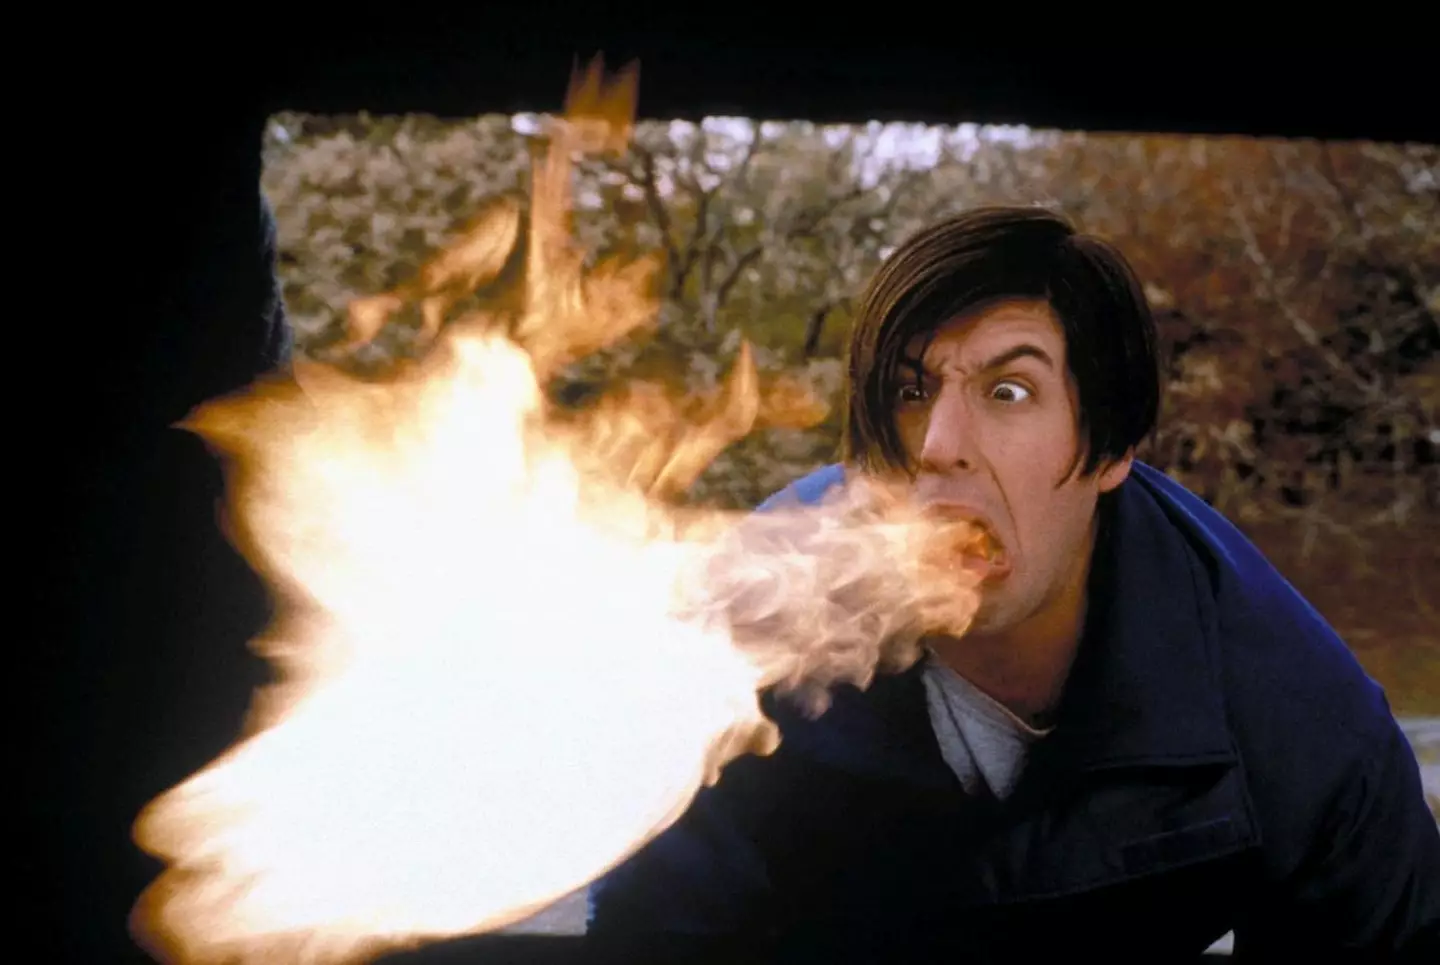 Sandler's Little Nicky, is definitely one of his lowest rated films, as per the critics.